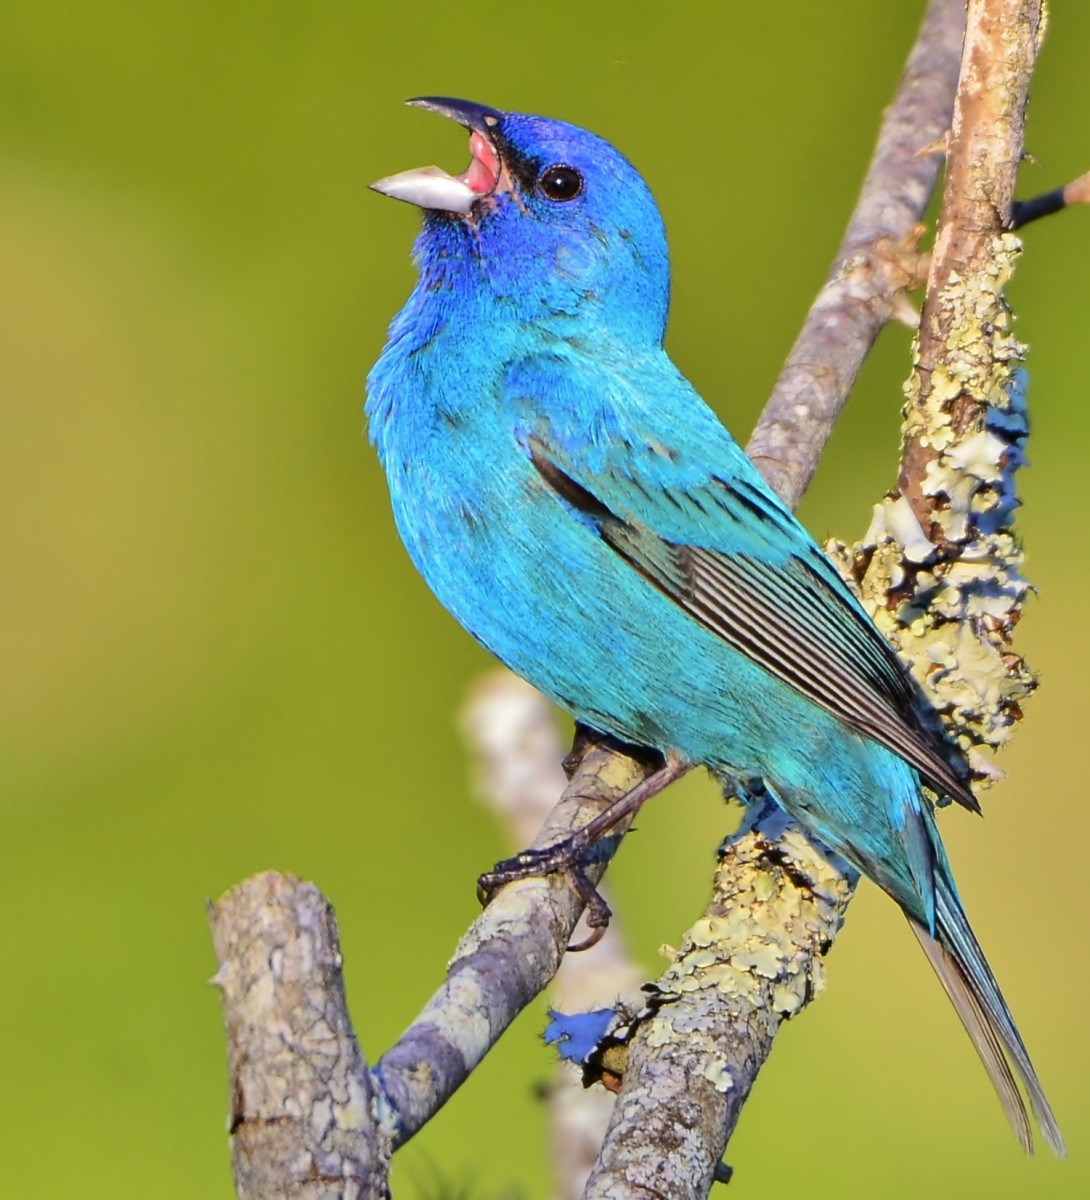 In some areas, the indigo bunting may be mistaken for a bluebird. On closer inspection, the differences are obvious.